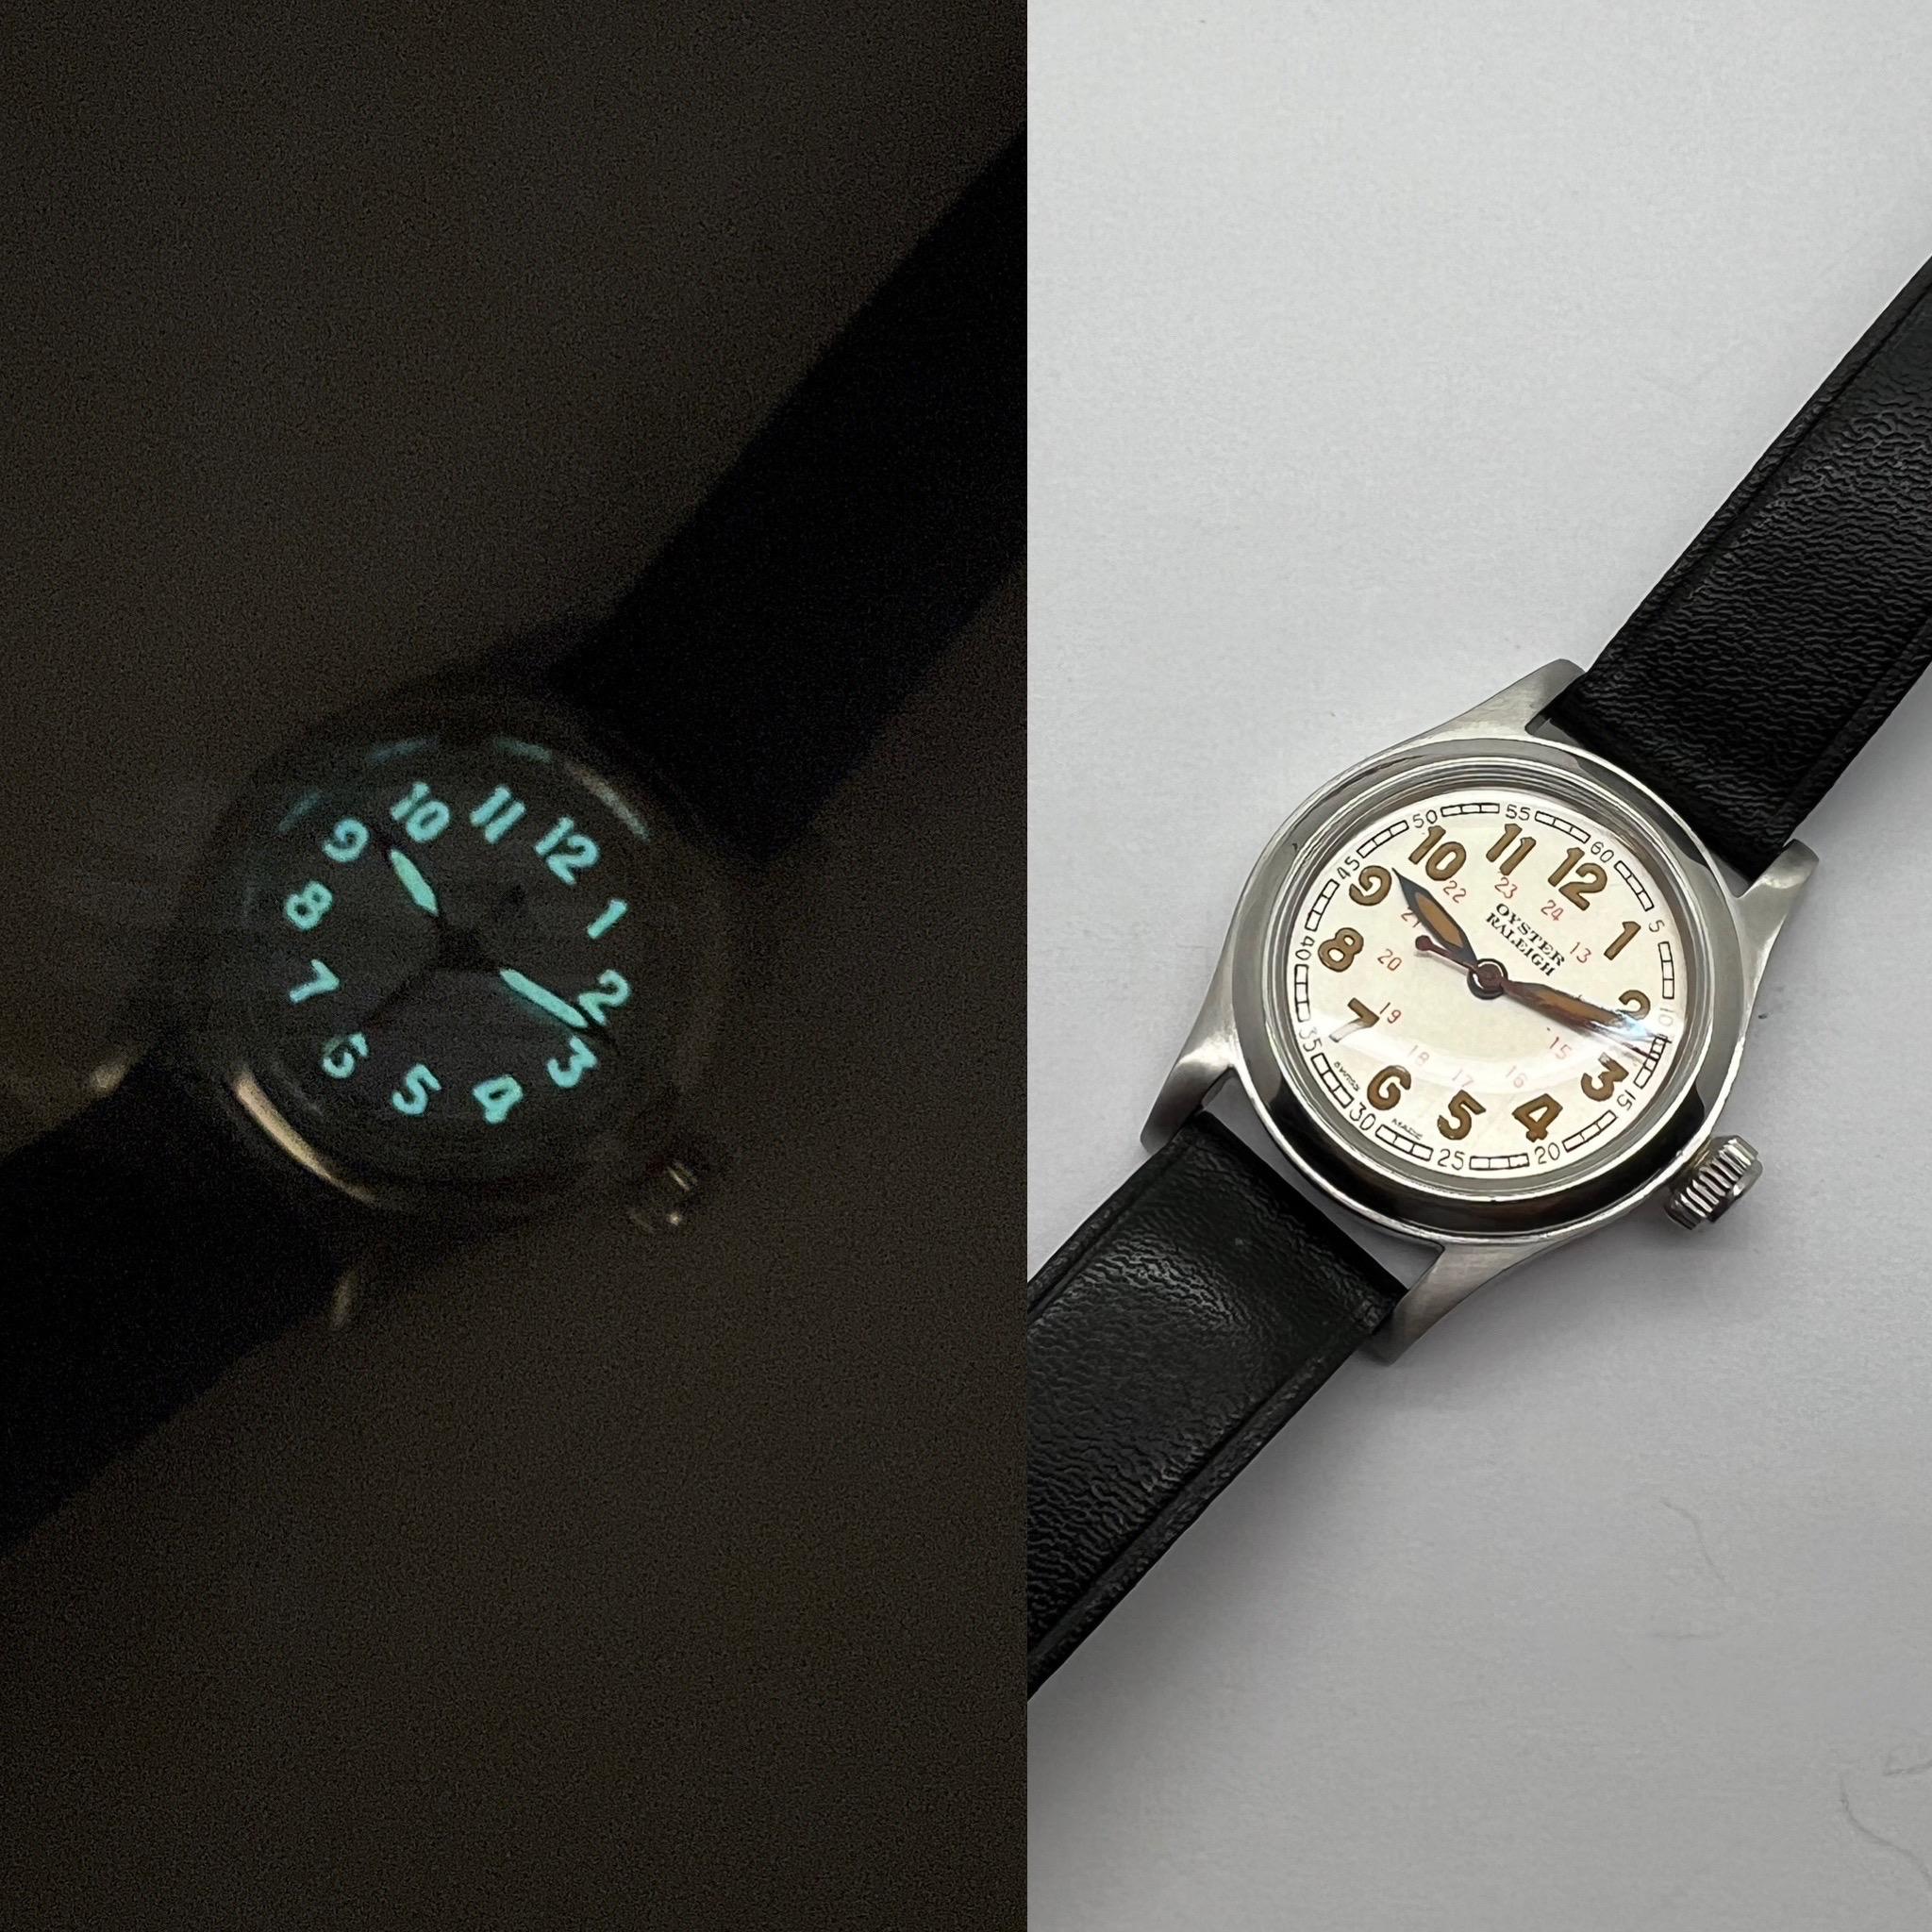 5 pointed coronet watch